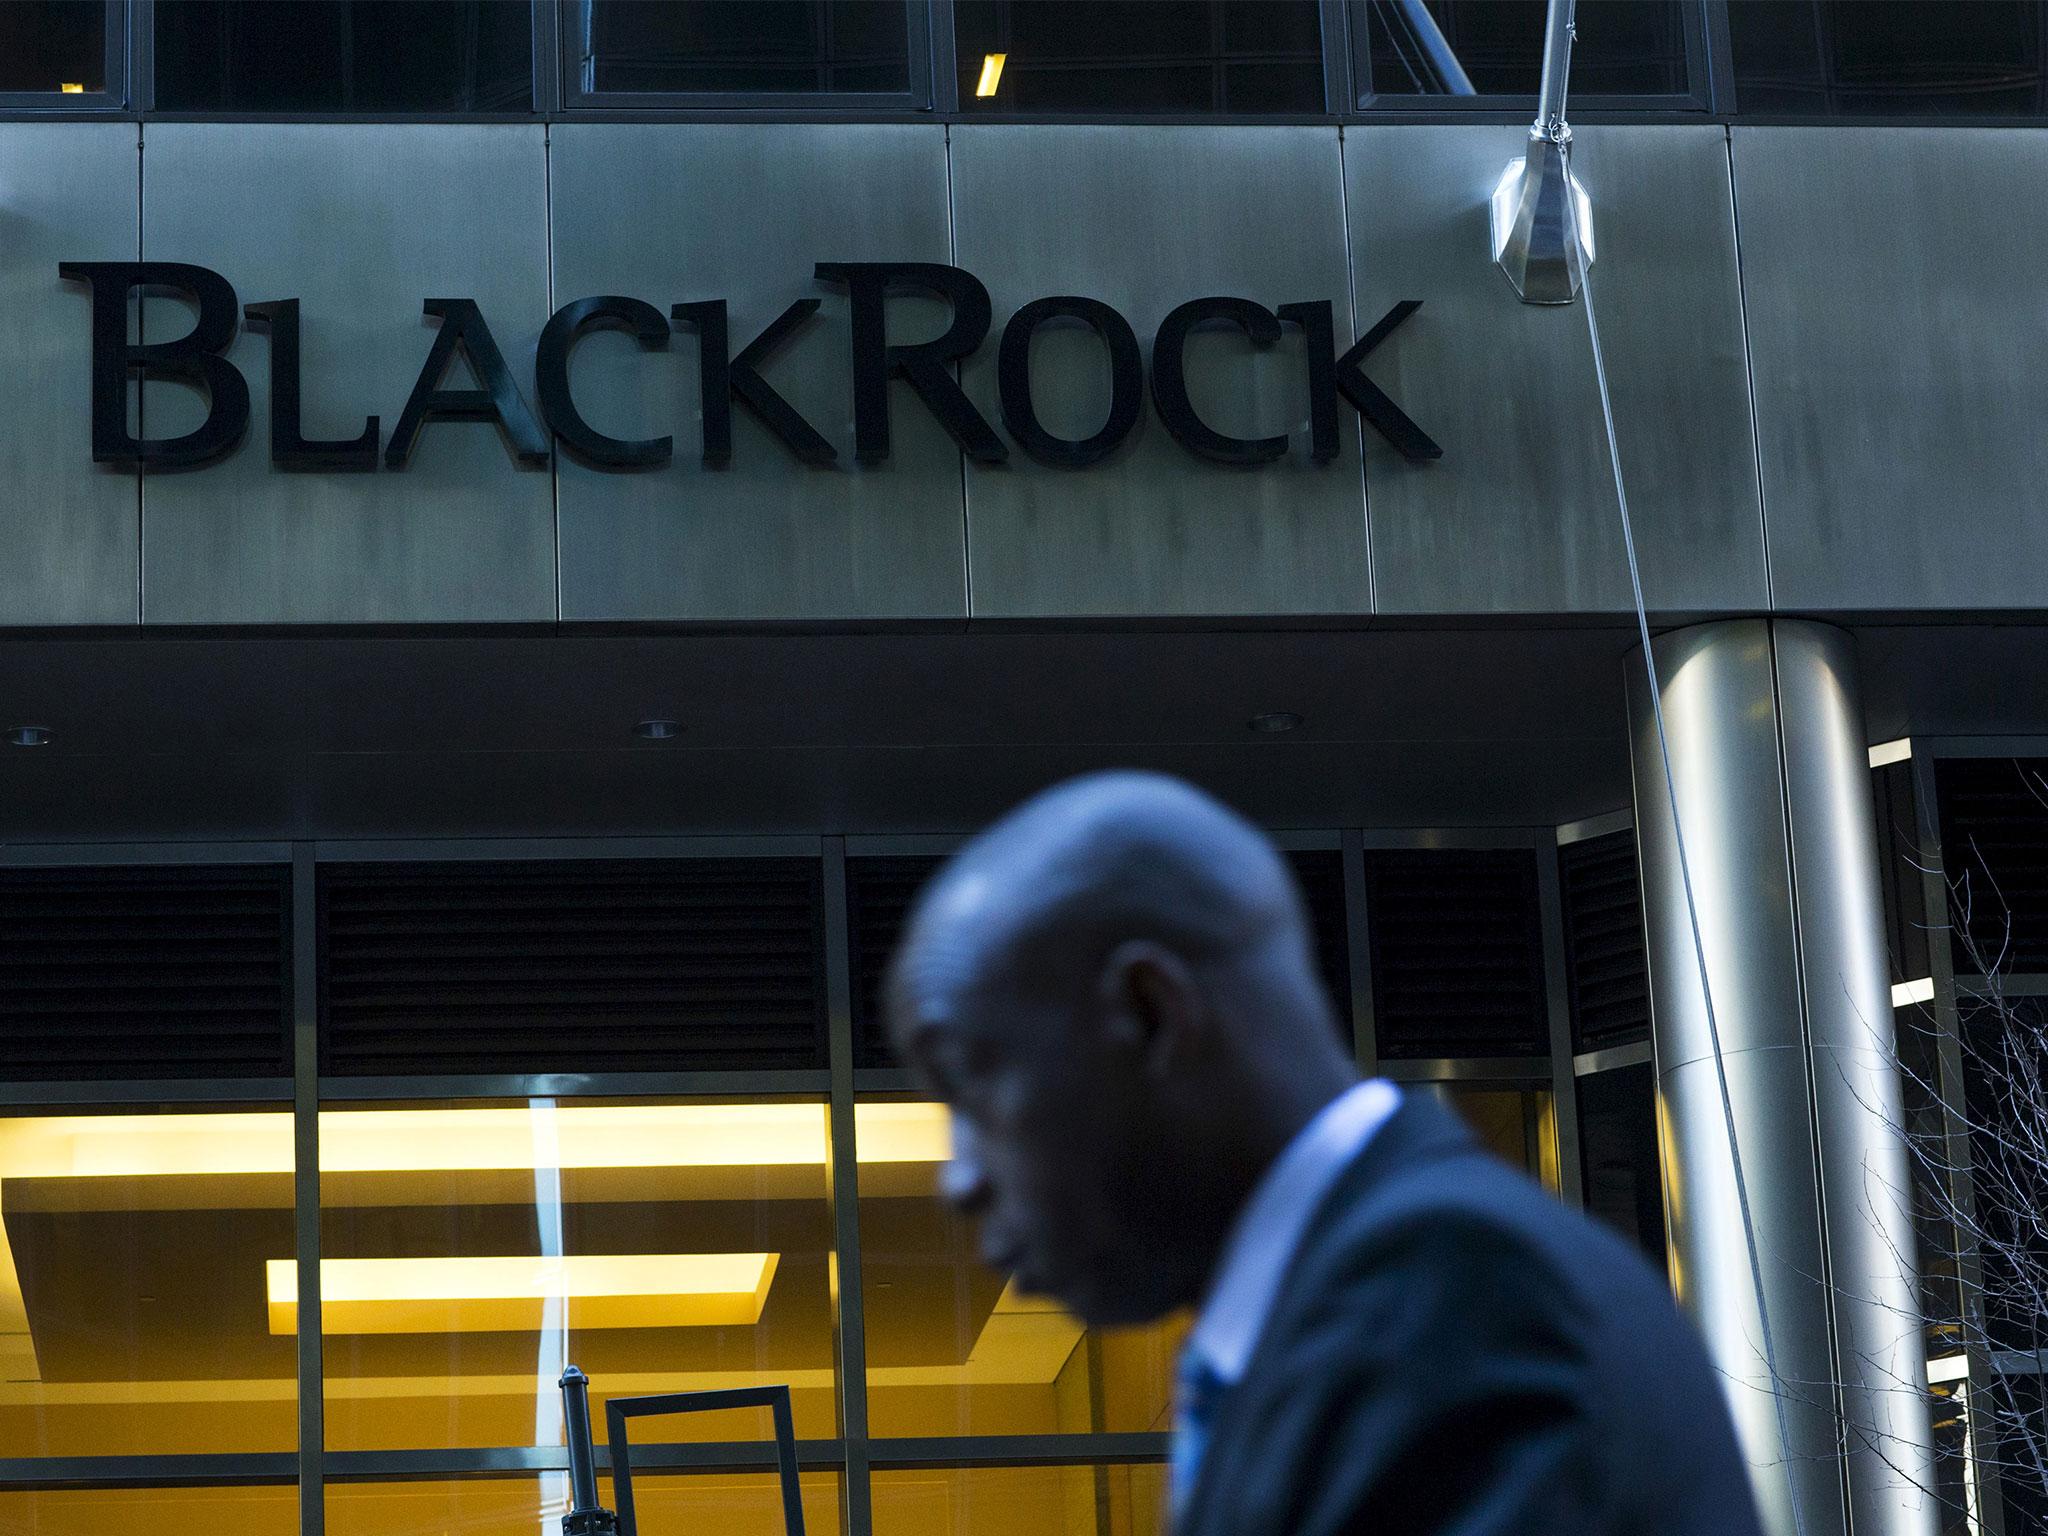 BlackRock is the largest asset management firm in the world